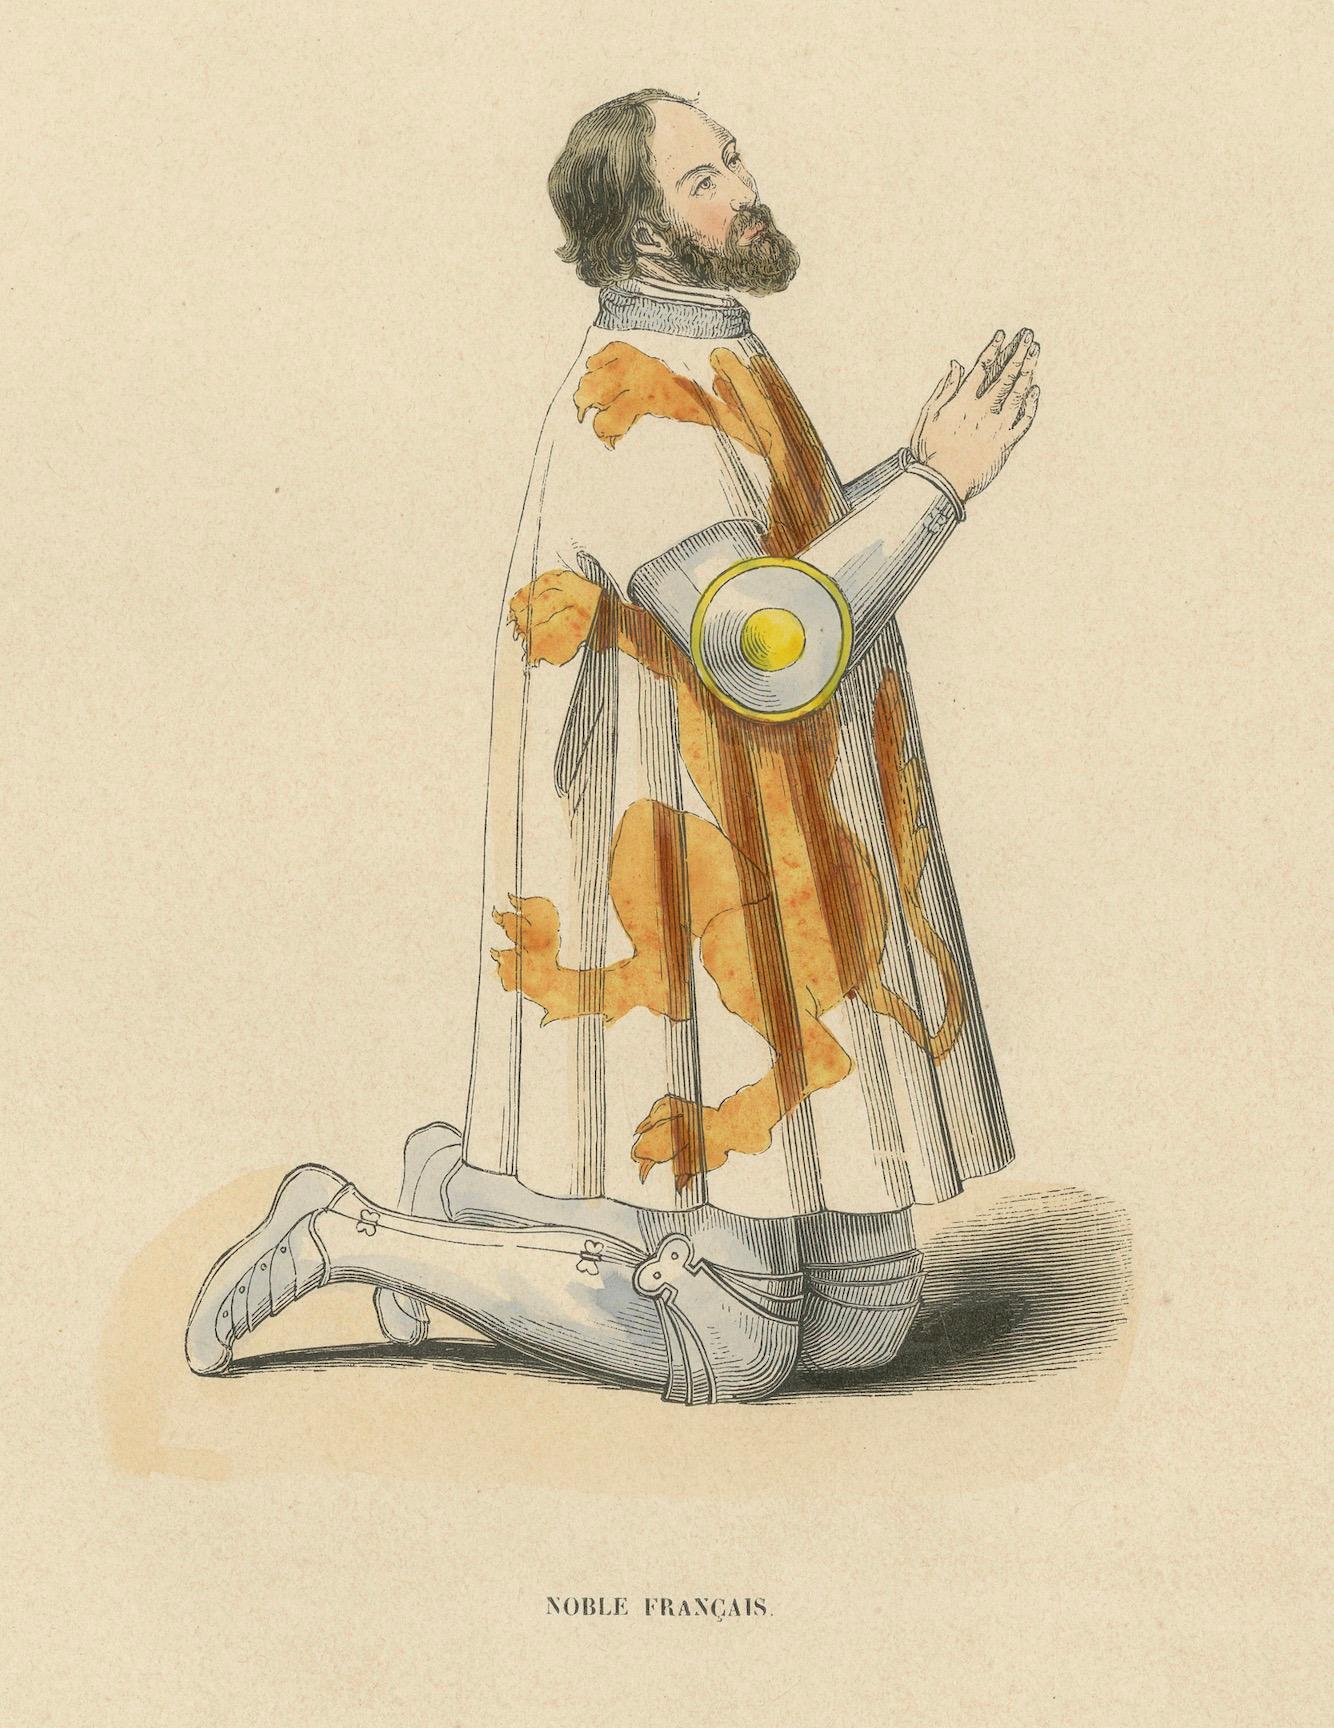 Mid-19th Century Devout Supplication of a French Nobleman: A Pictorial Representation, 1847